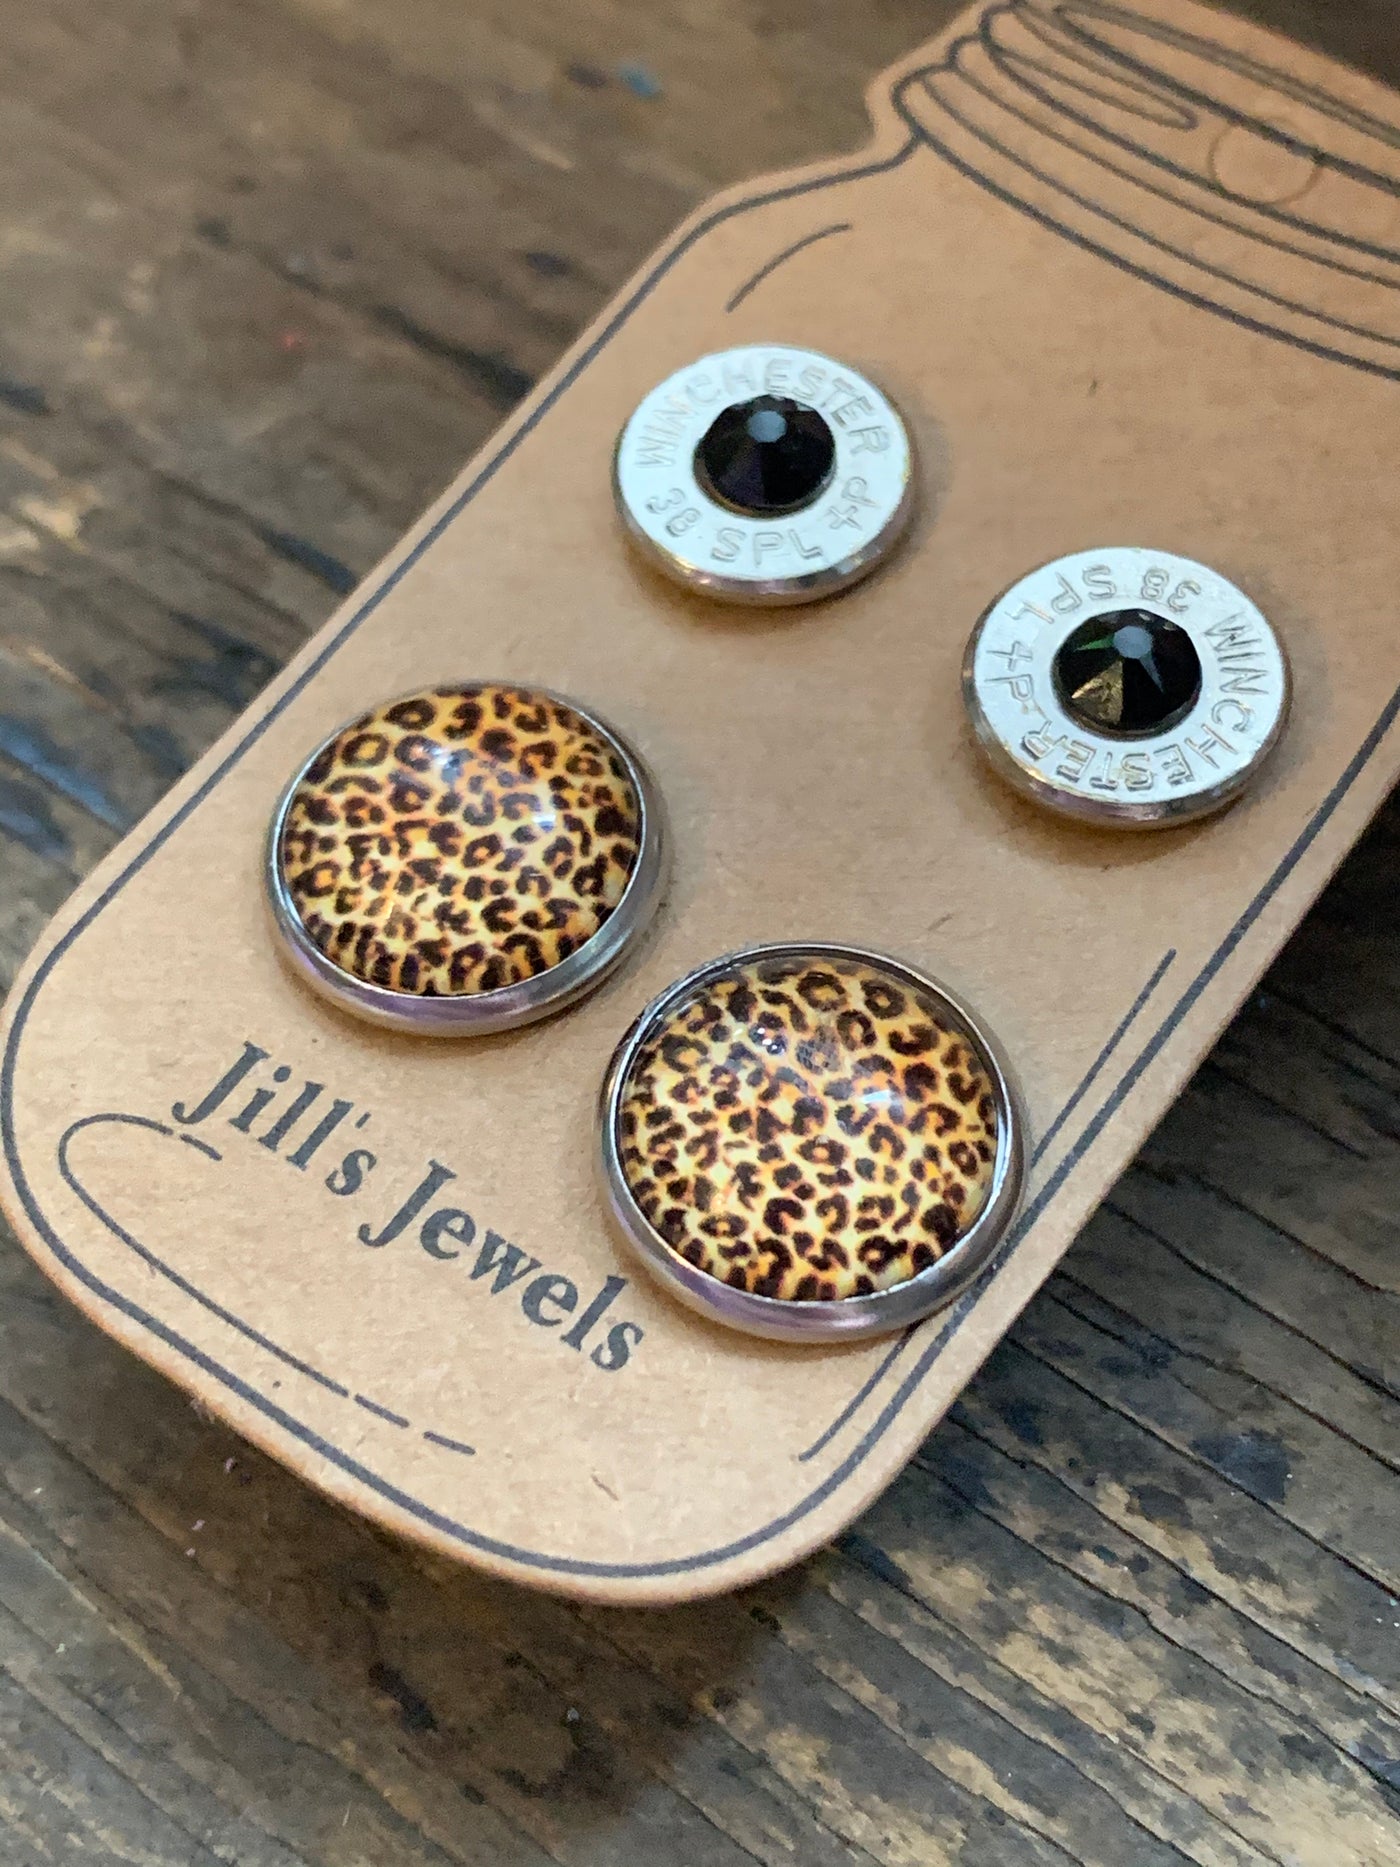 Leopard Print and 38 Special bullet earring set - Jill's Jewels | Unique, Handcrafted, Trendy, And Fun Jewelry